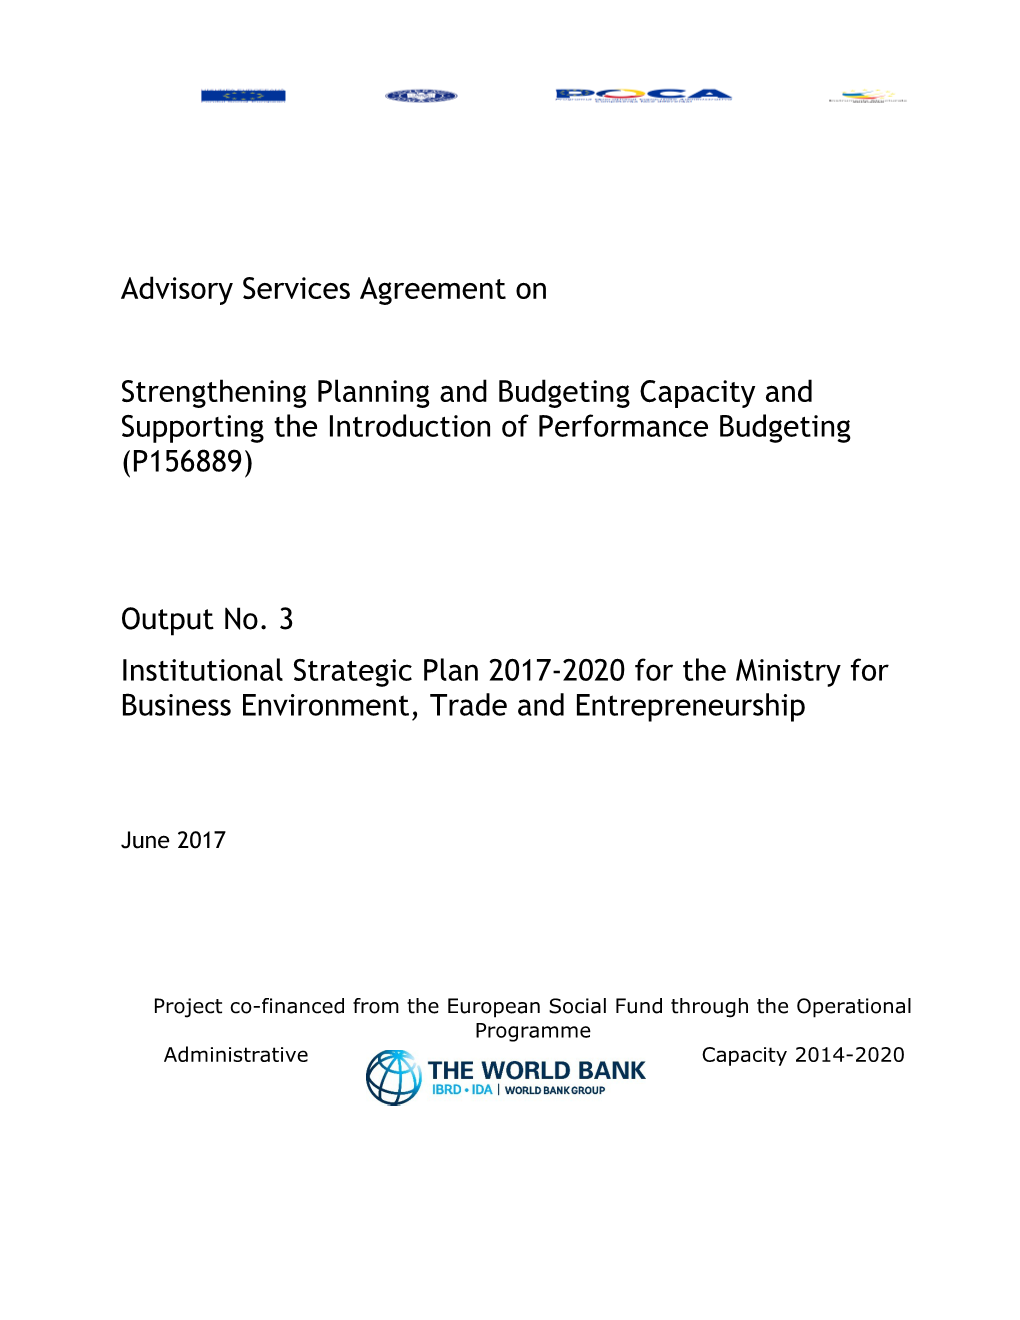 Strengthening Planning and Budgeting Capacity and Supporting the Introduction of Performance